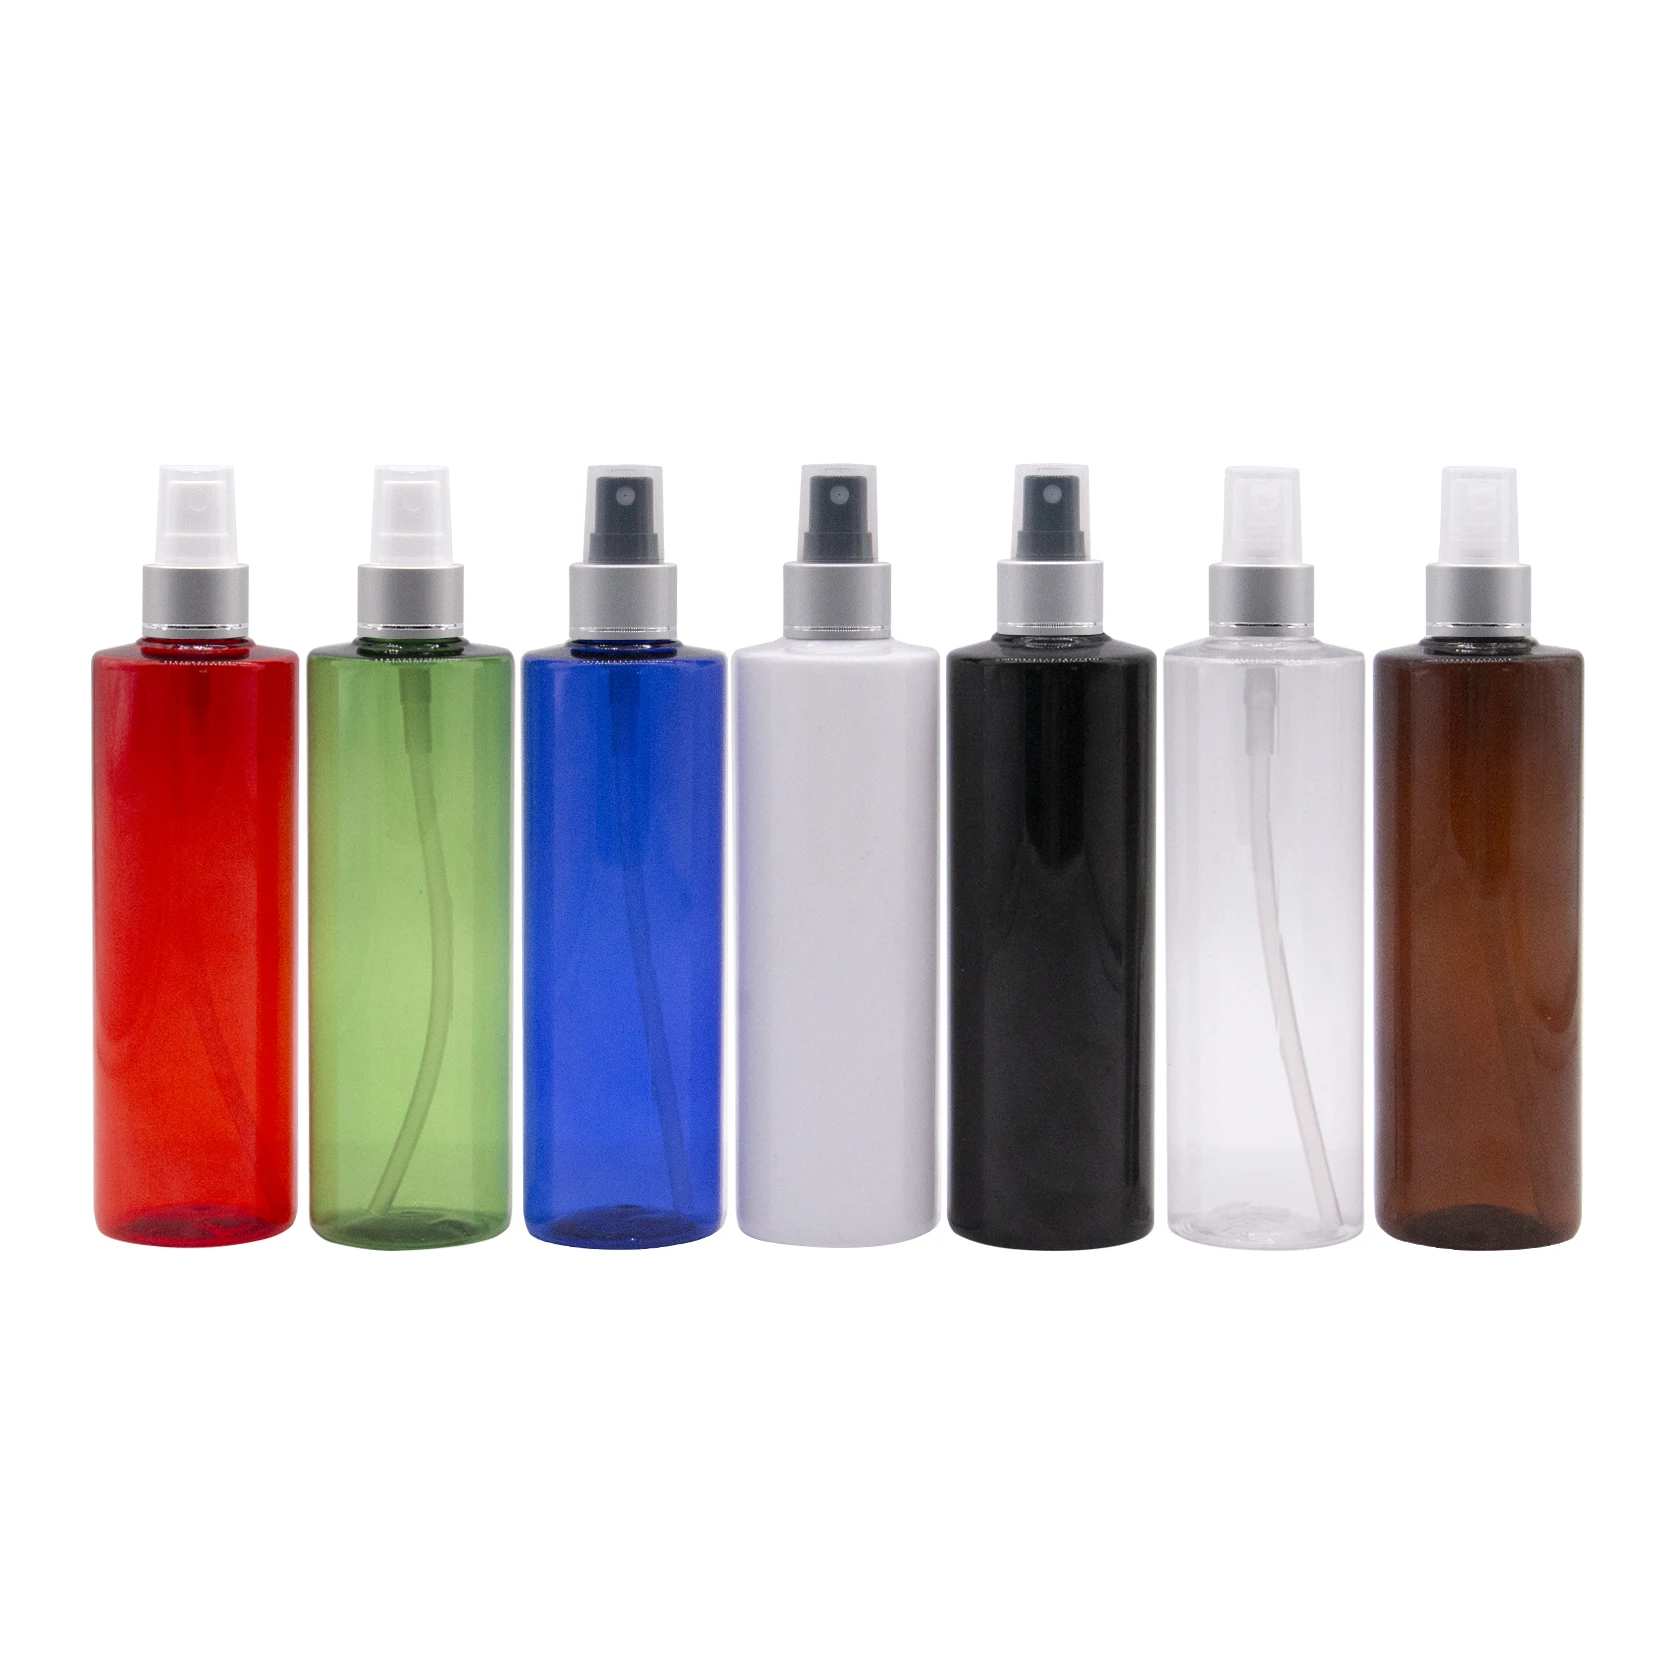 

250ml x 25 Red Refillable Empty Spray Perfume Bottle ,250cc Fine Mist Bath And Body Works Plastic Container With Pump Atomizer